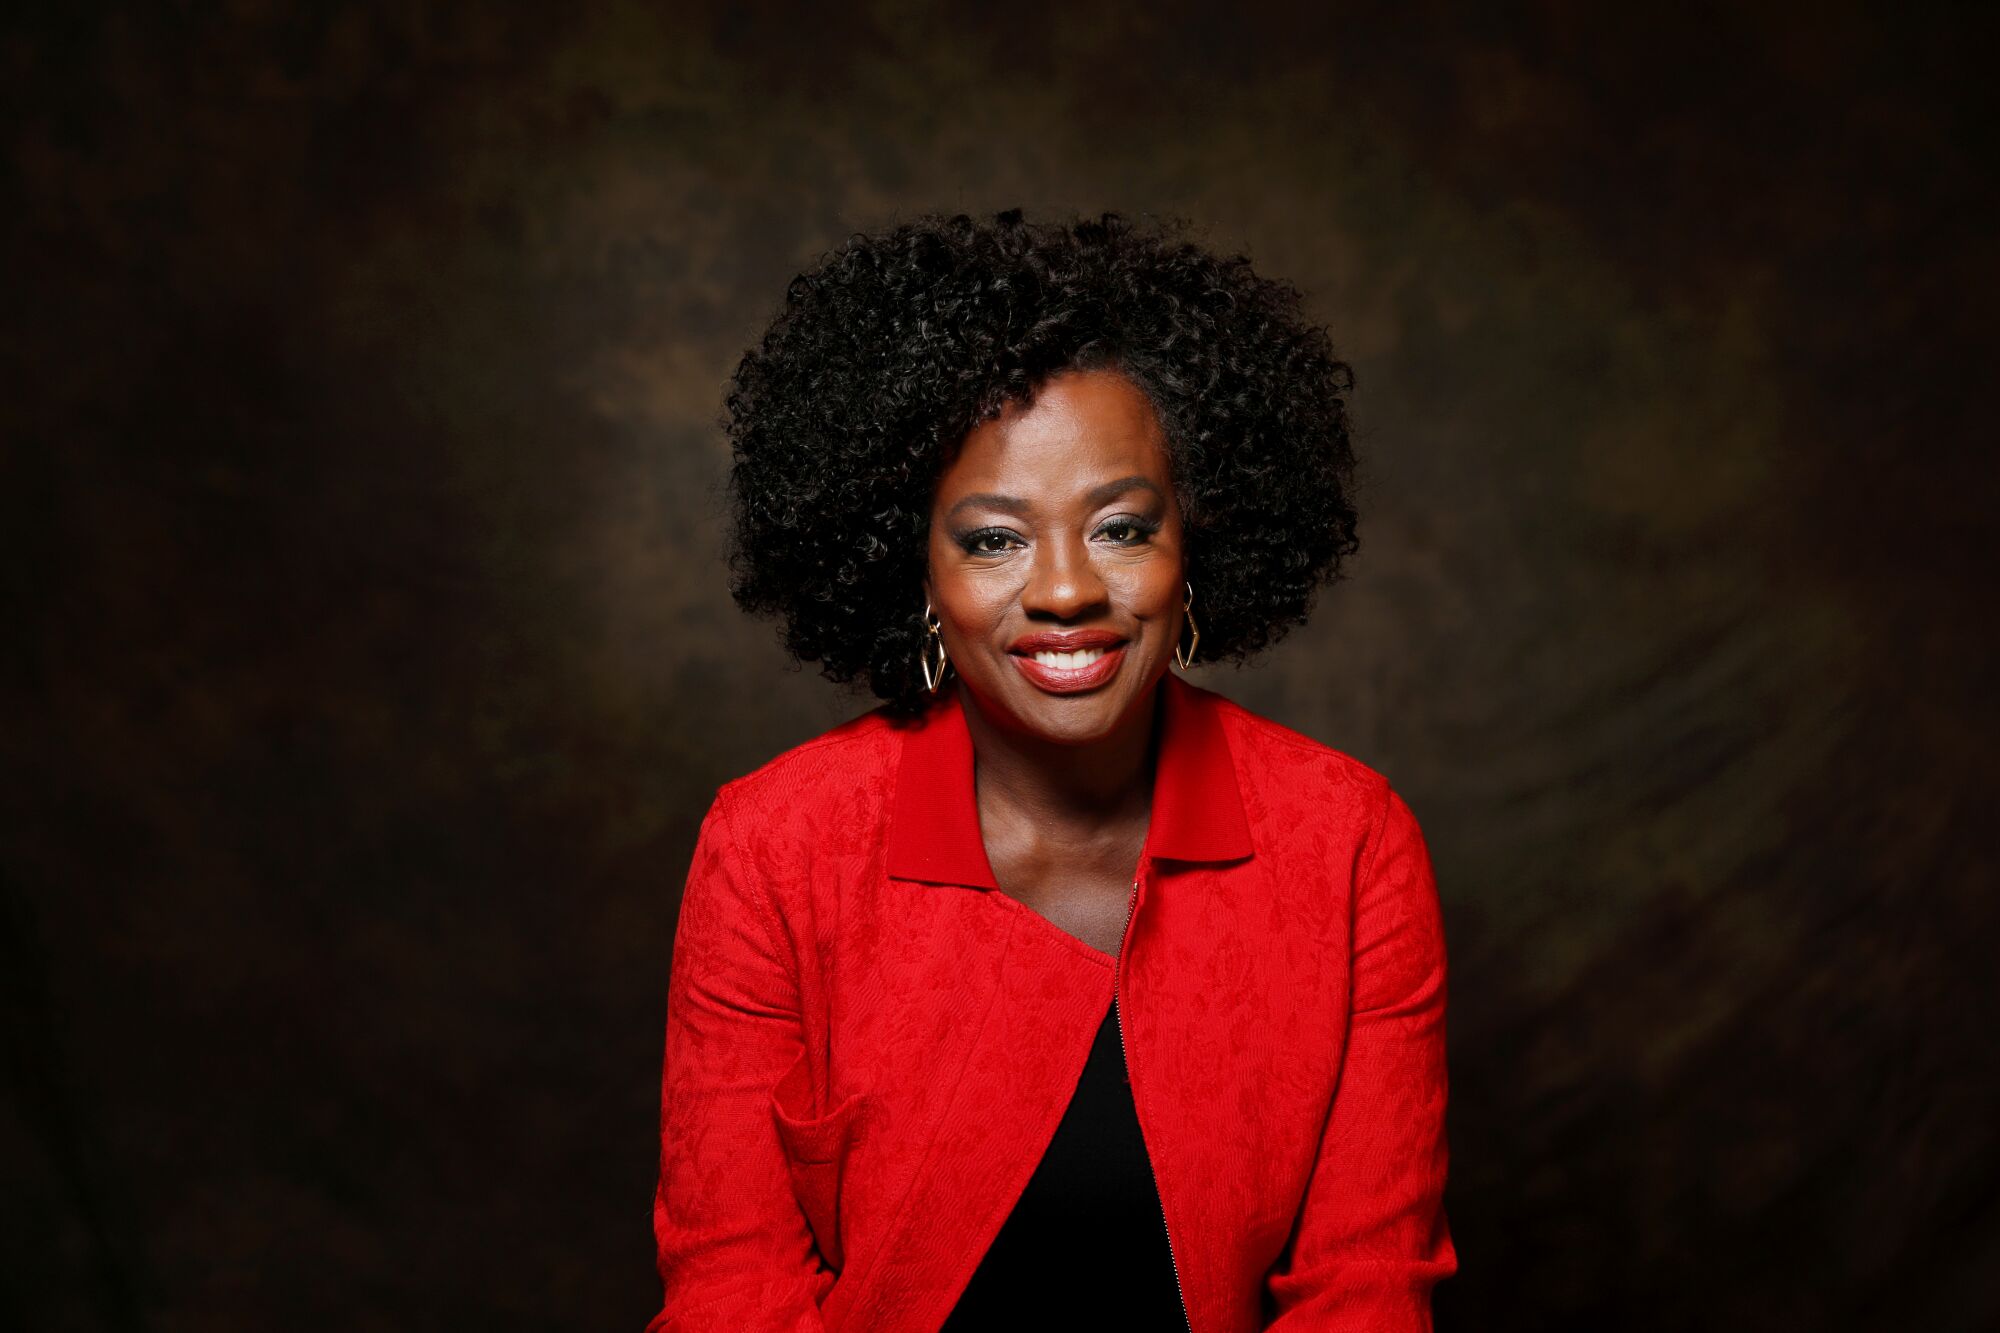 Viola Davis is photographed at the Ahmanson Theatre in Los Angeles.